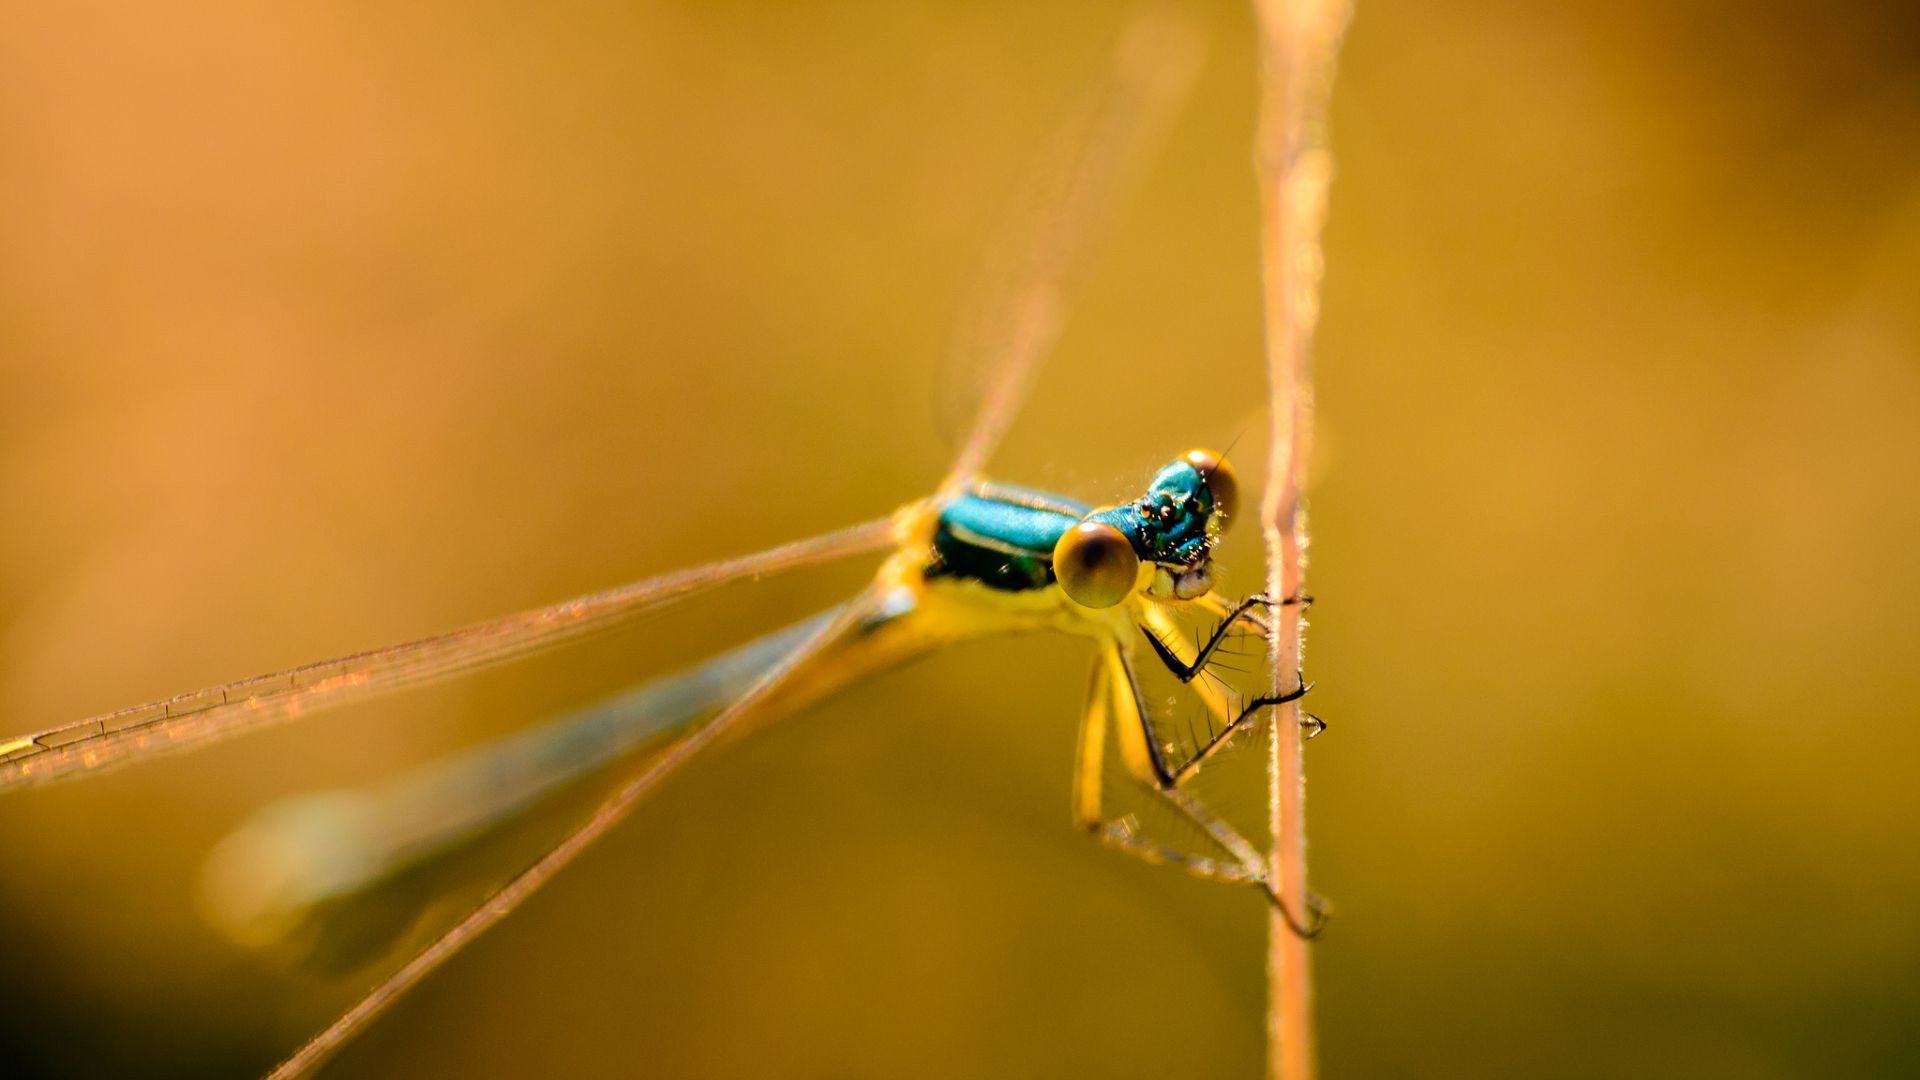 HD wallpaper, Photography, Dragonfly